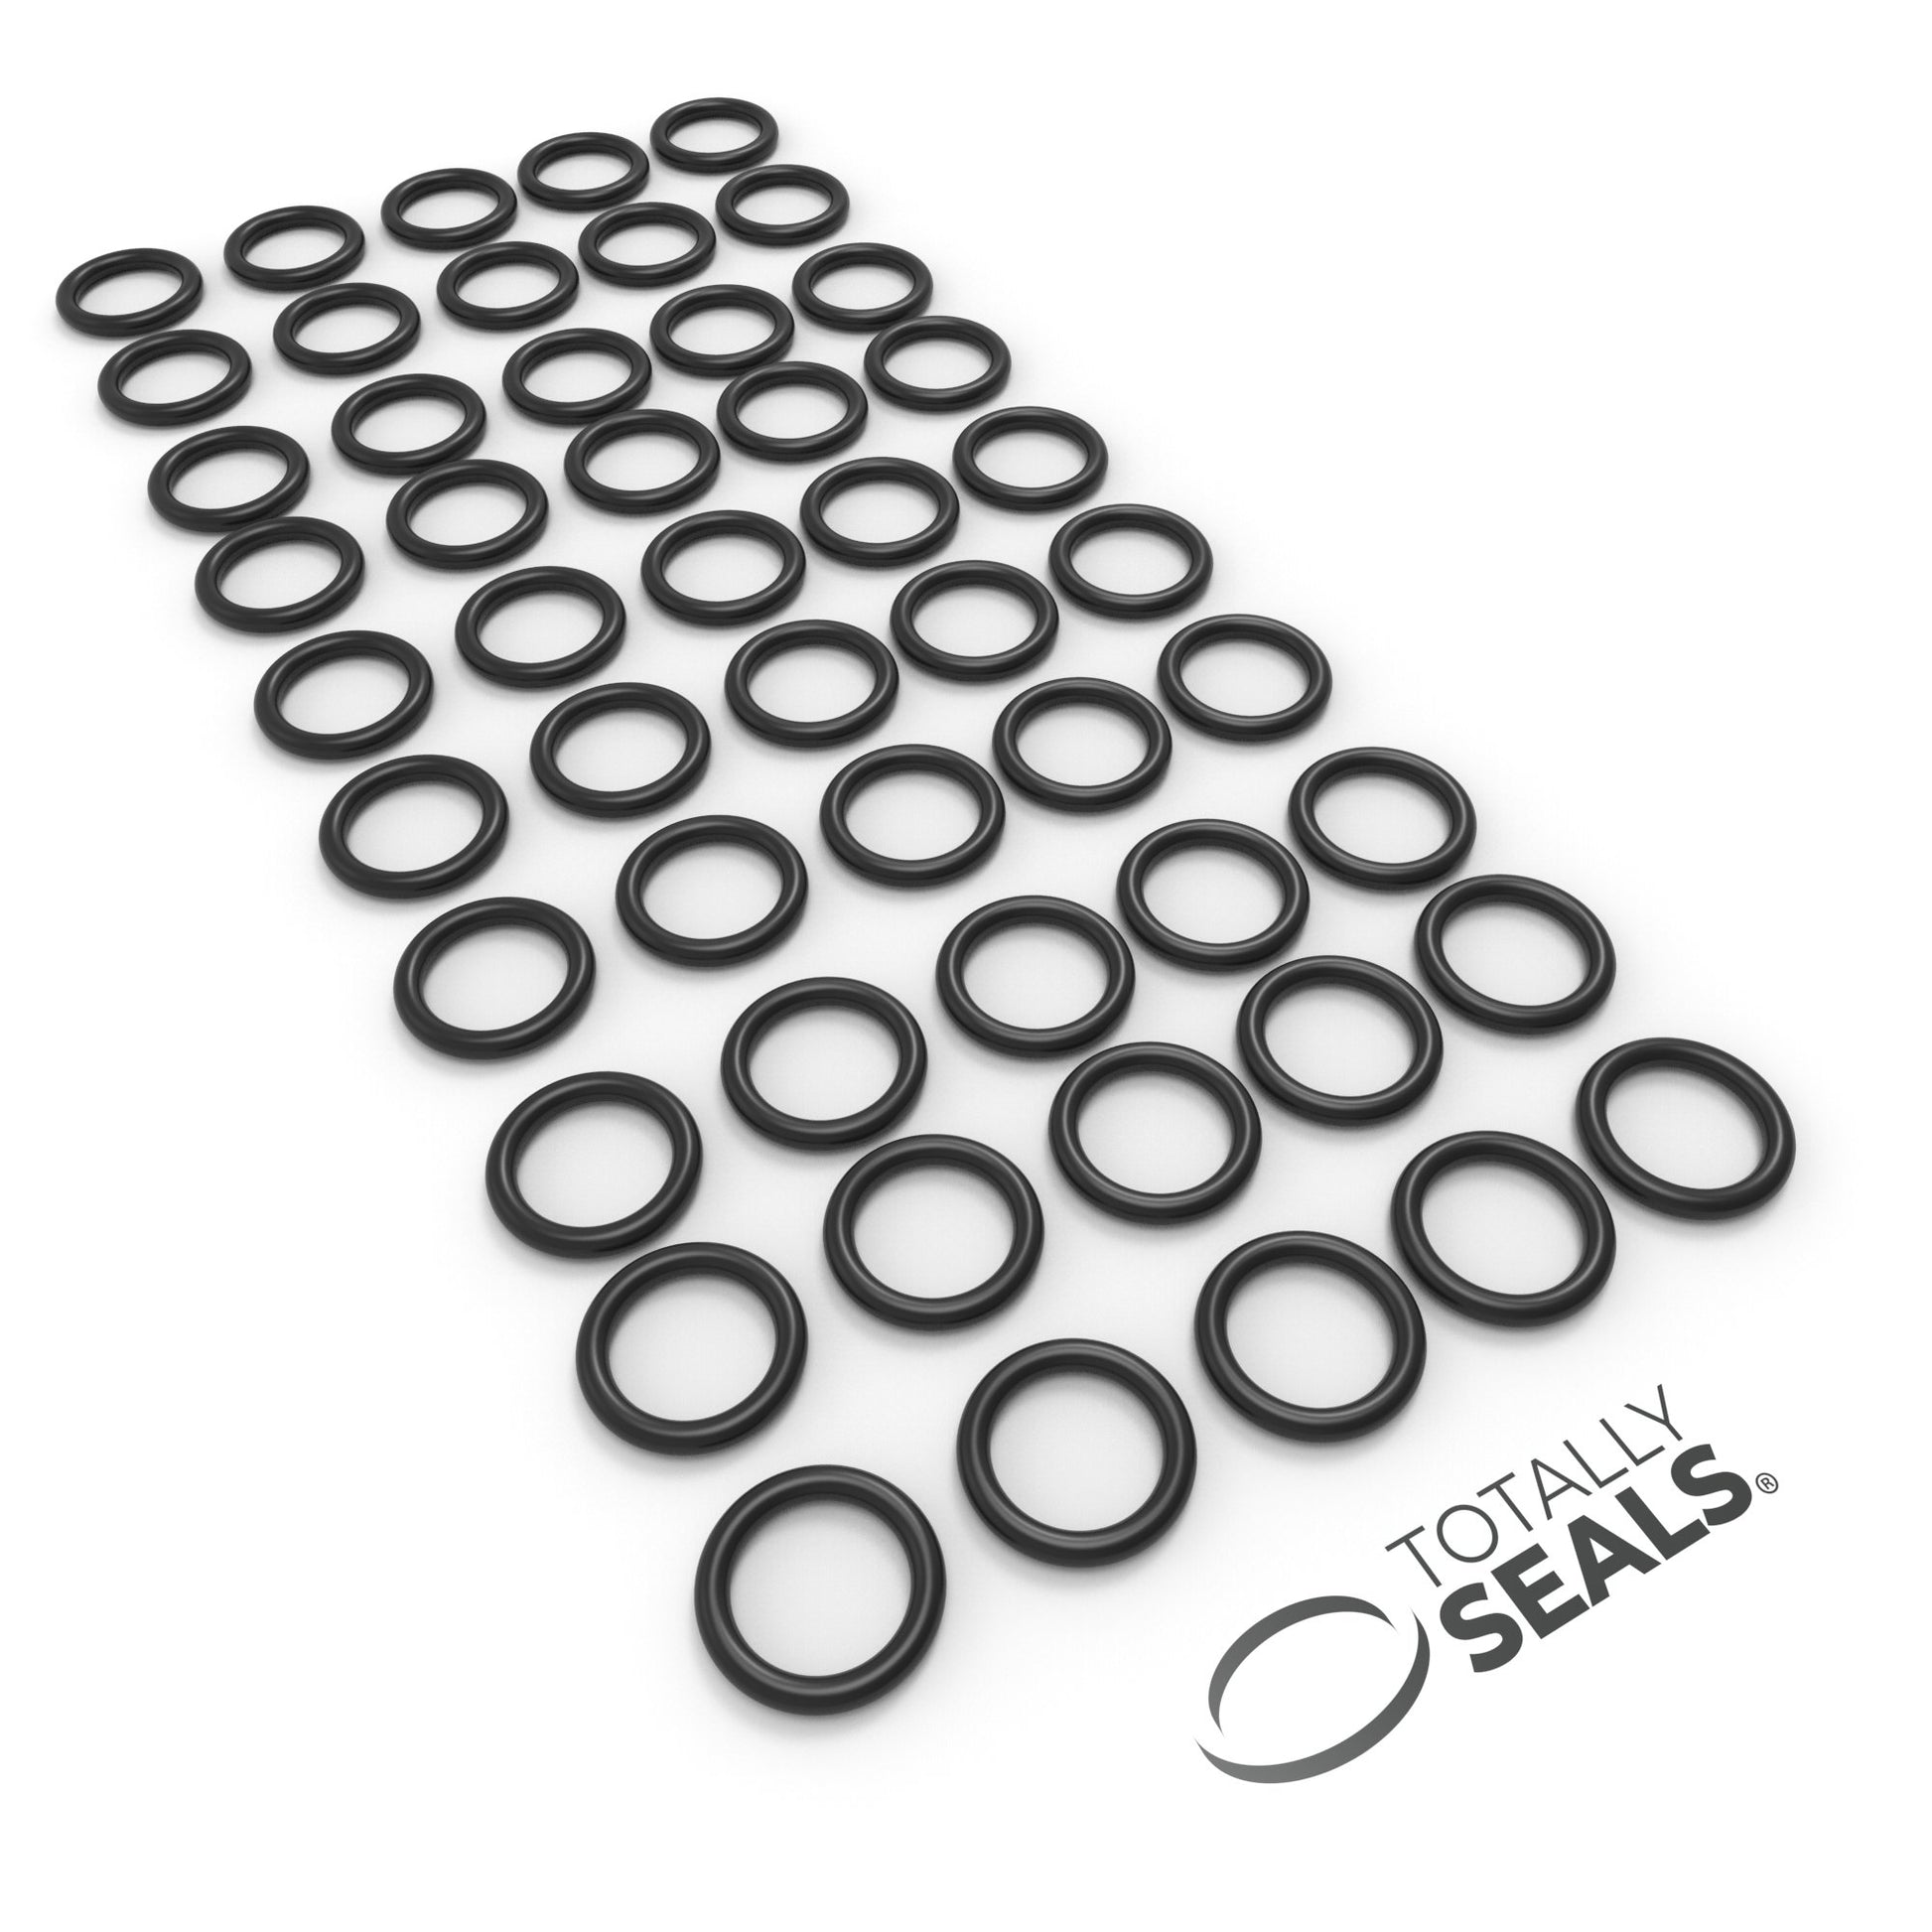 1-5/8" x 3/16" (BS326) Imperial Nitrile O-Rings - Totally Seals®